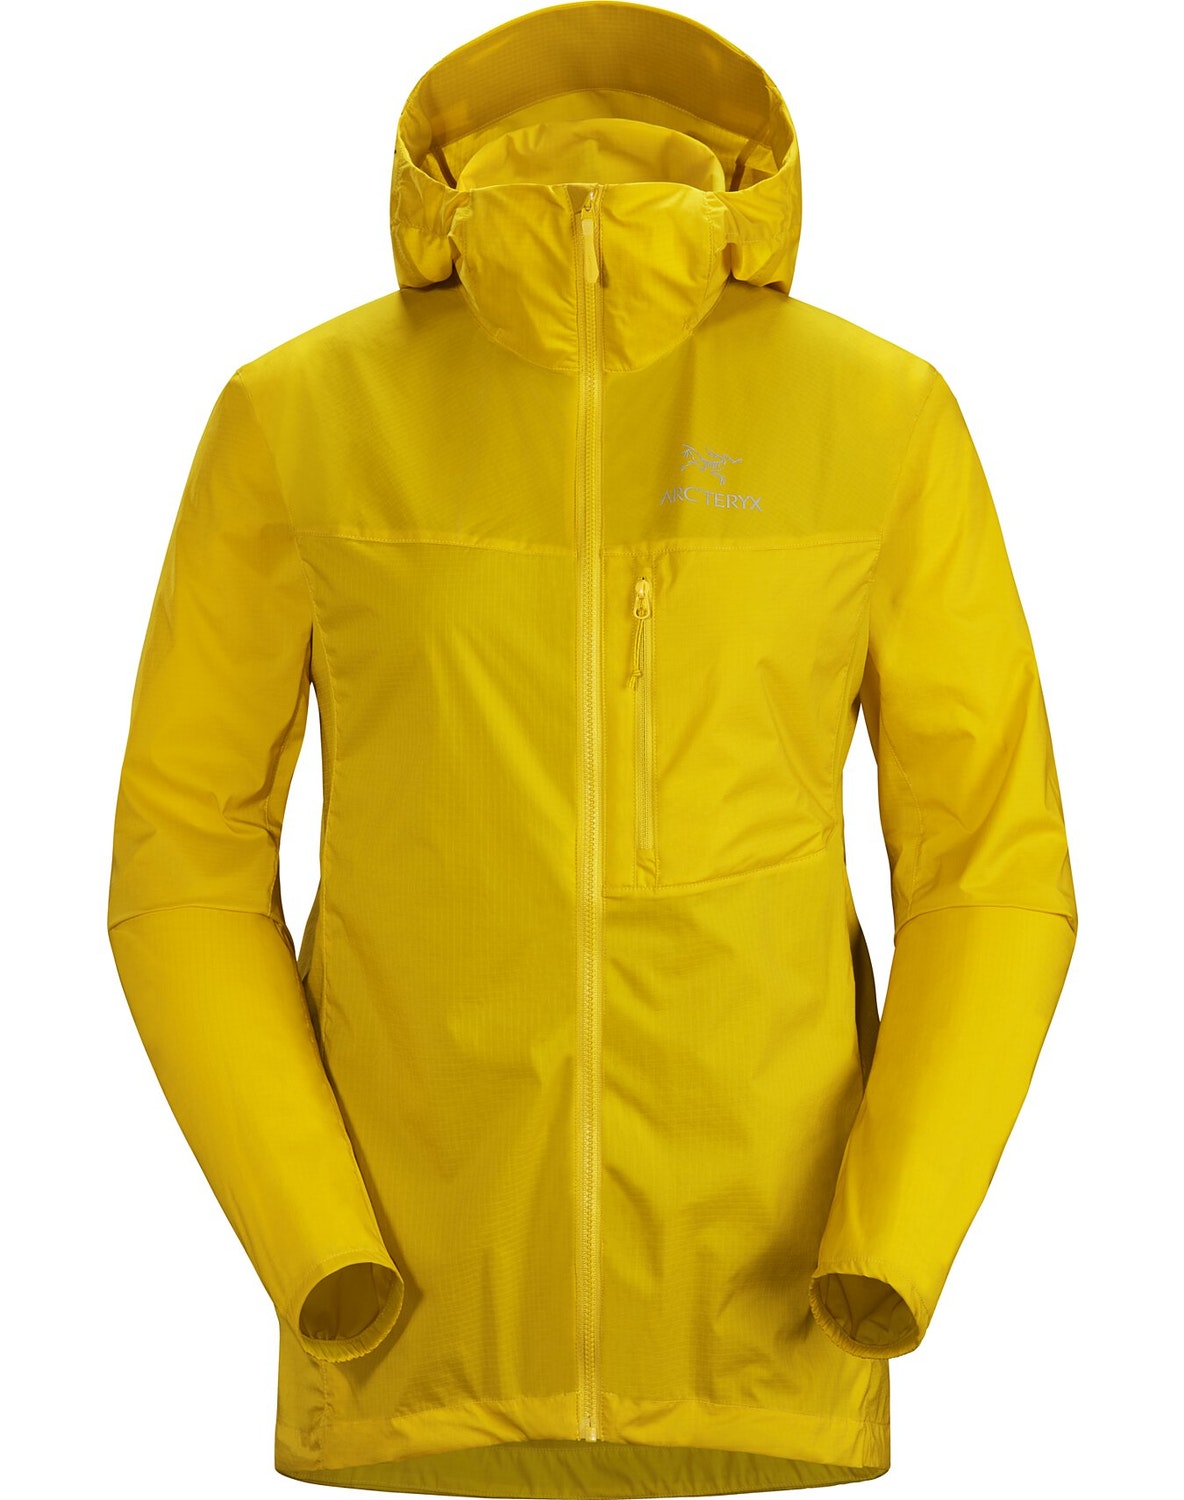 Hoody Arc'teryx Squamish Donna Gialle - IT-63349633